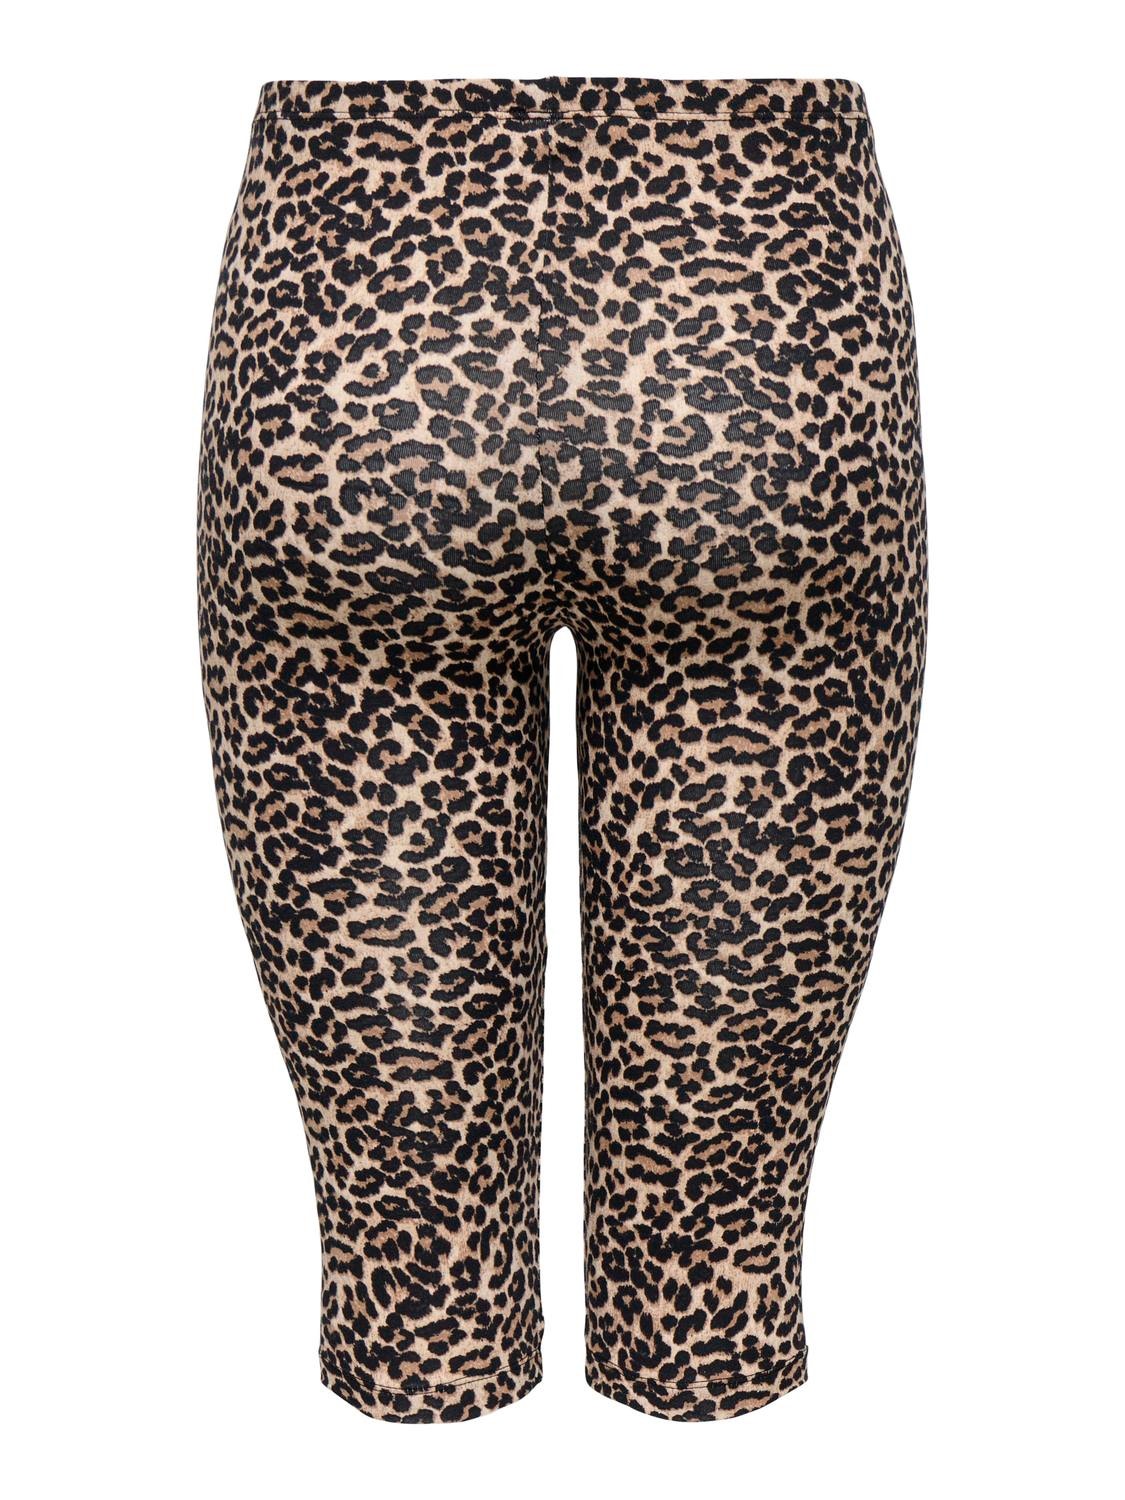 ONLY Leopard printede knickers -Ginger Root - 15343917